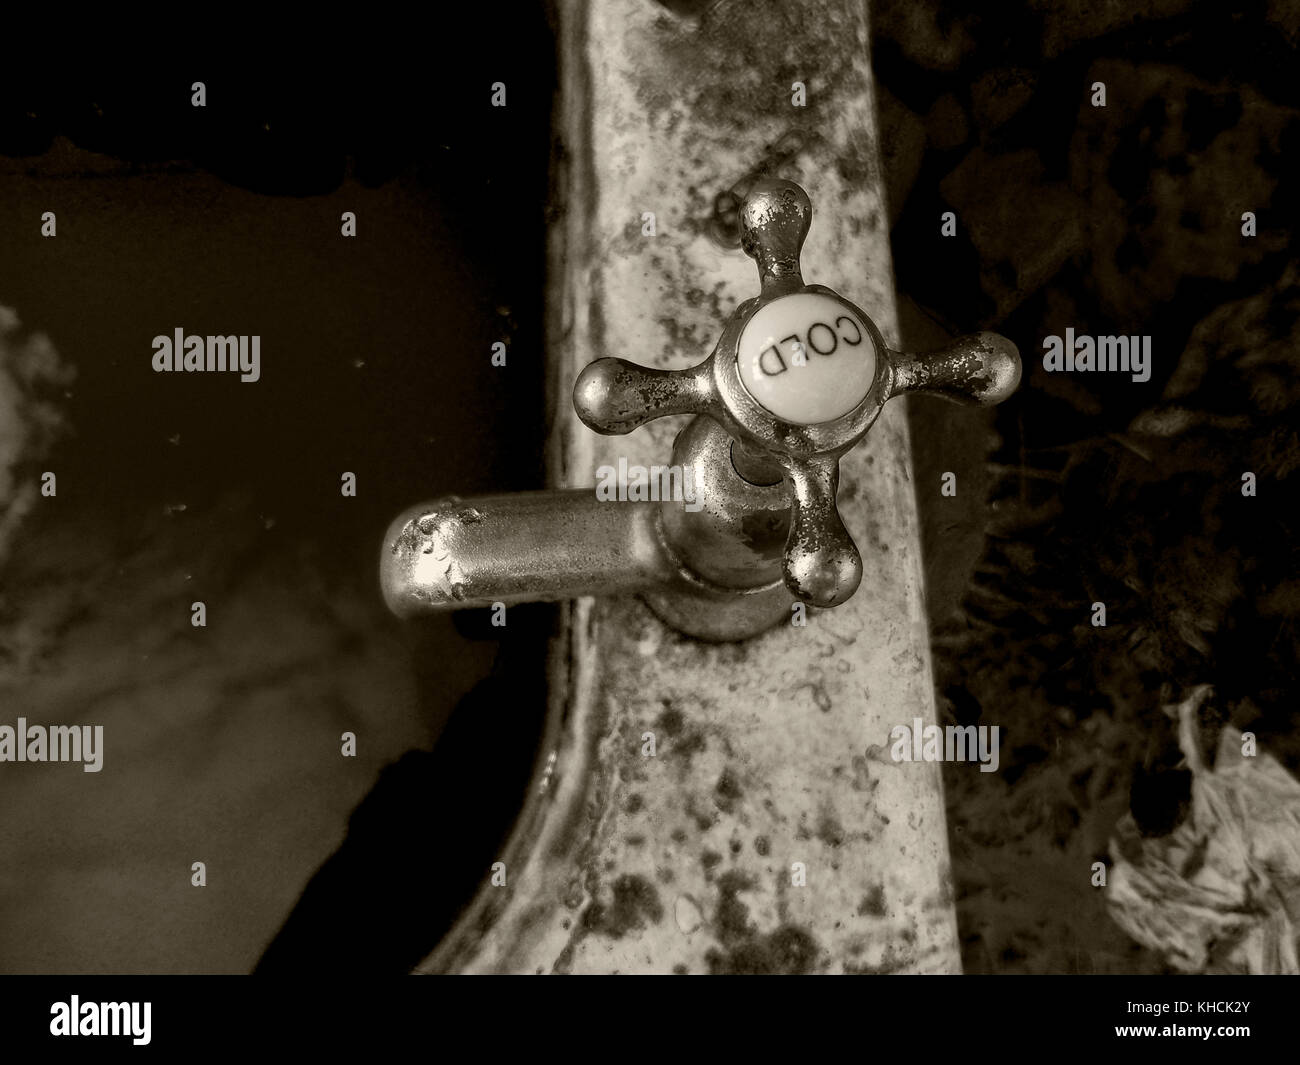 A chrome tap with a porcelain cold cap on a old cast iron bath with filthy water inside the bath. Left outside in the elements to slowly deteriorate. Stock Photo